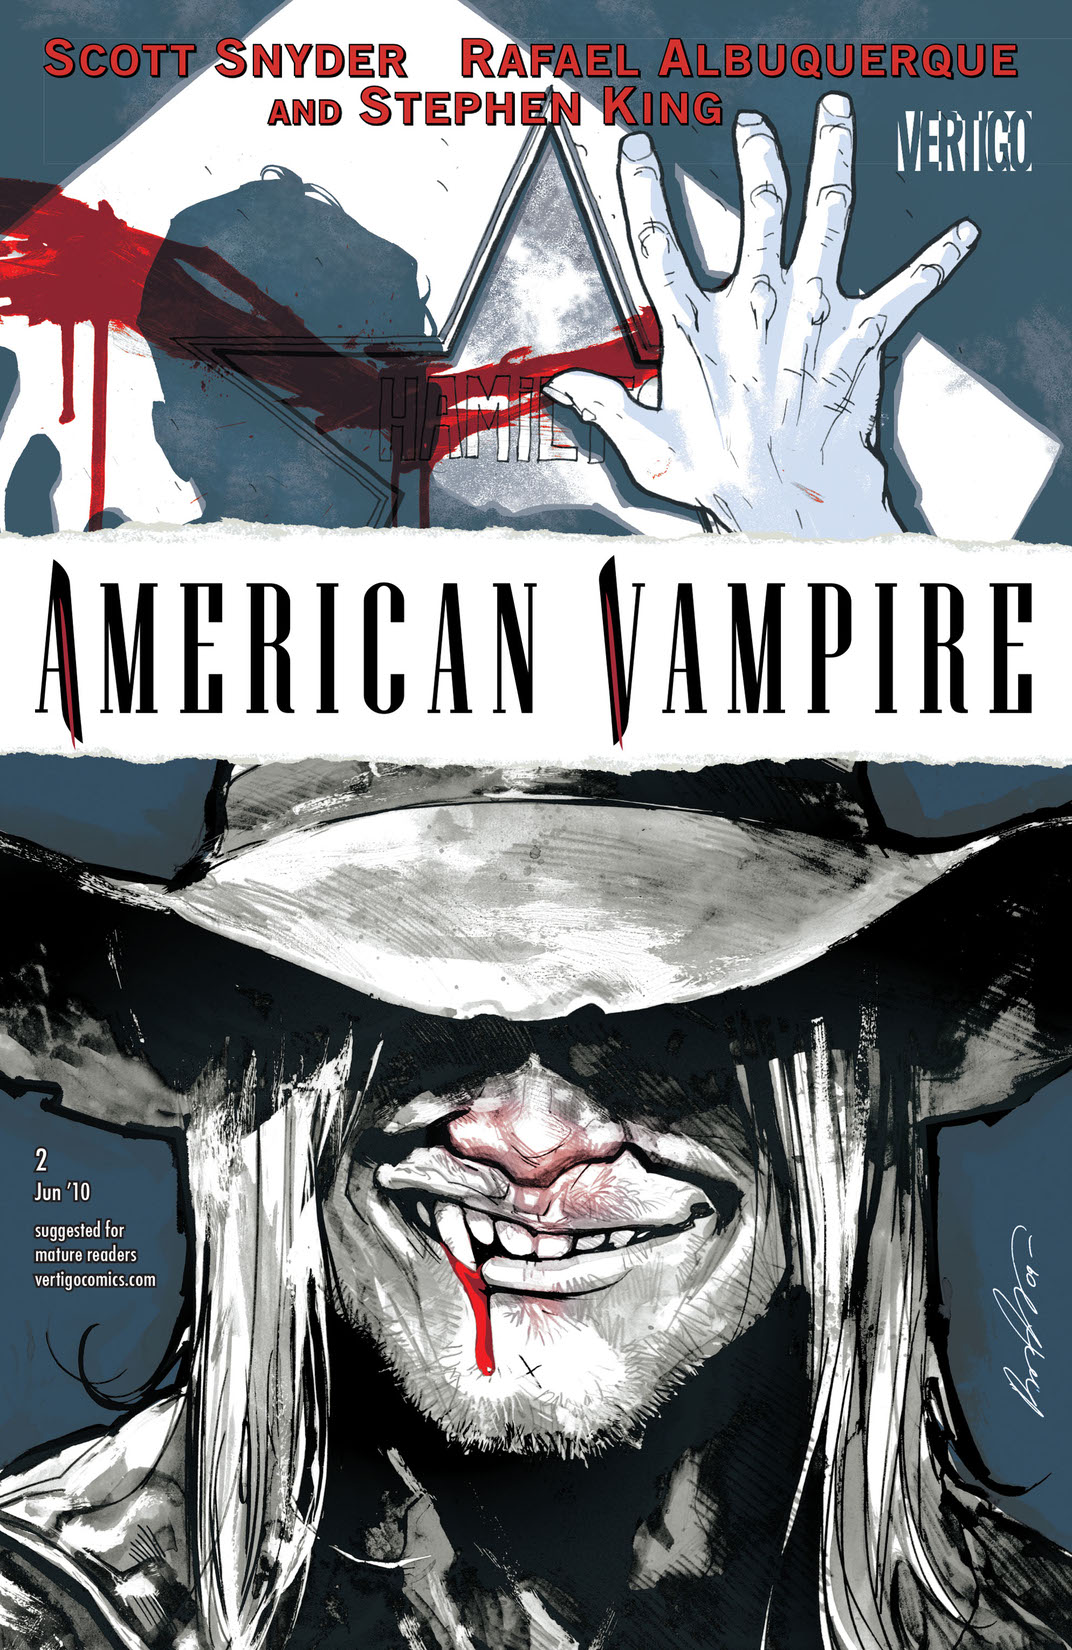 American Vampire #2 preview images